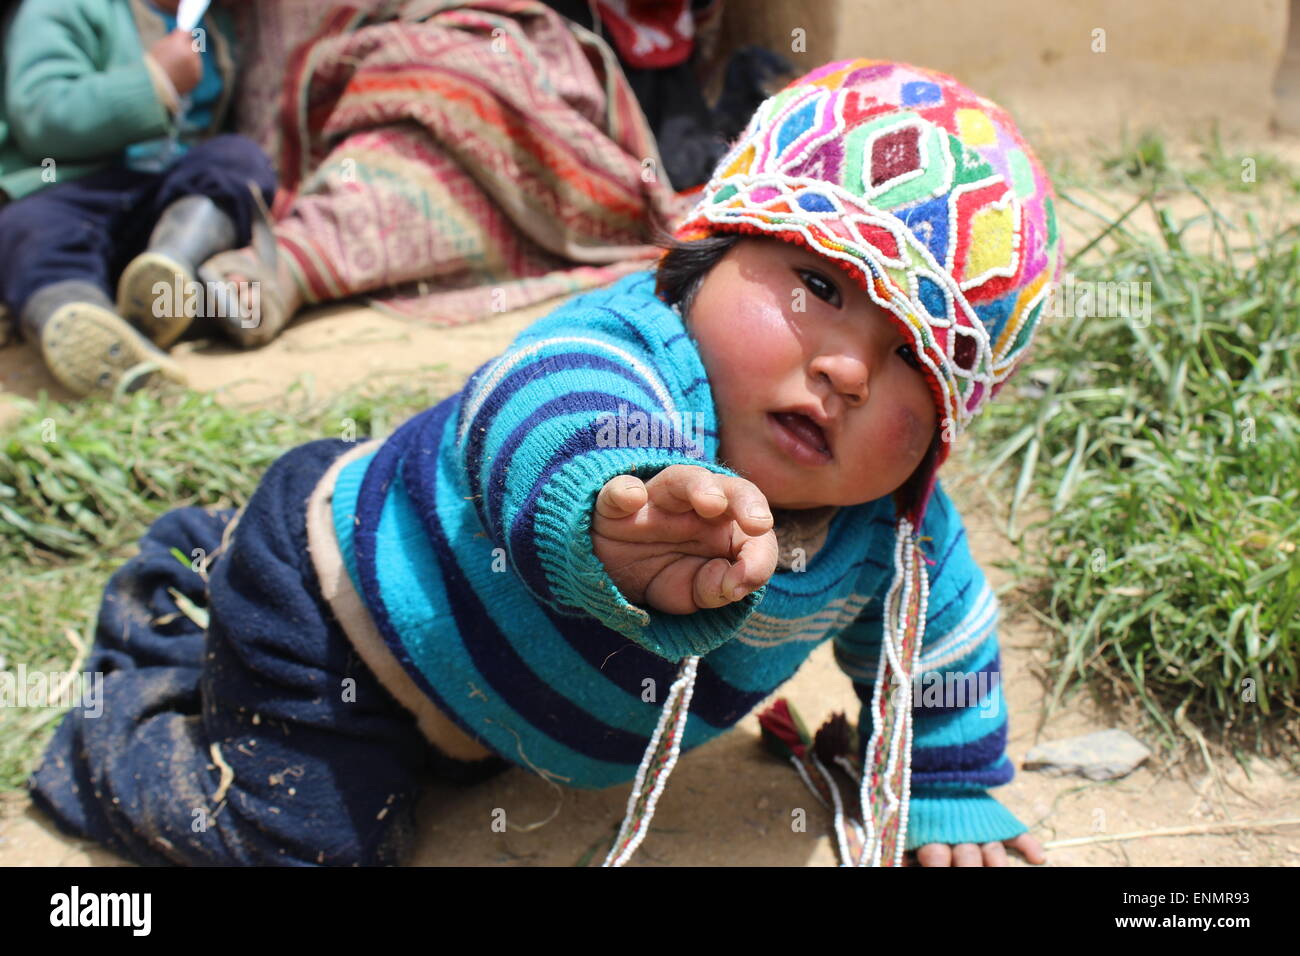 Adorable little Peruvian baby reaching out for the camera. Stock Photo